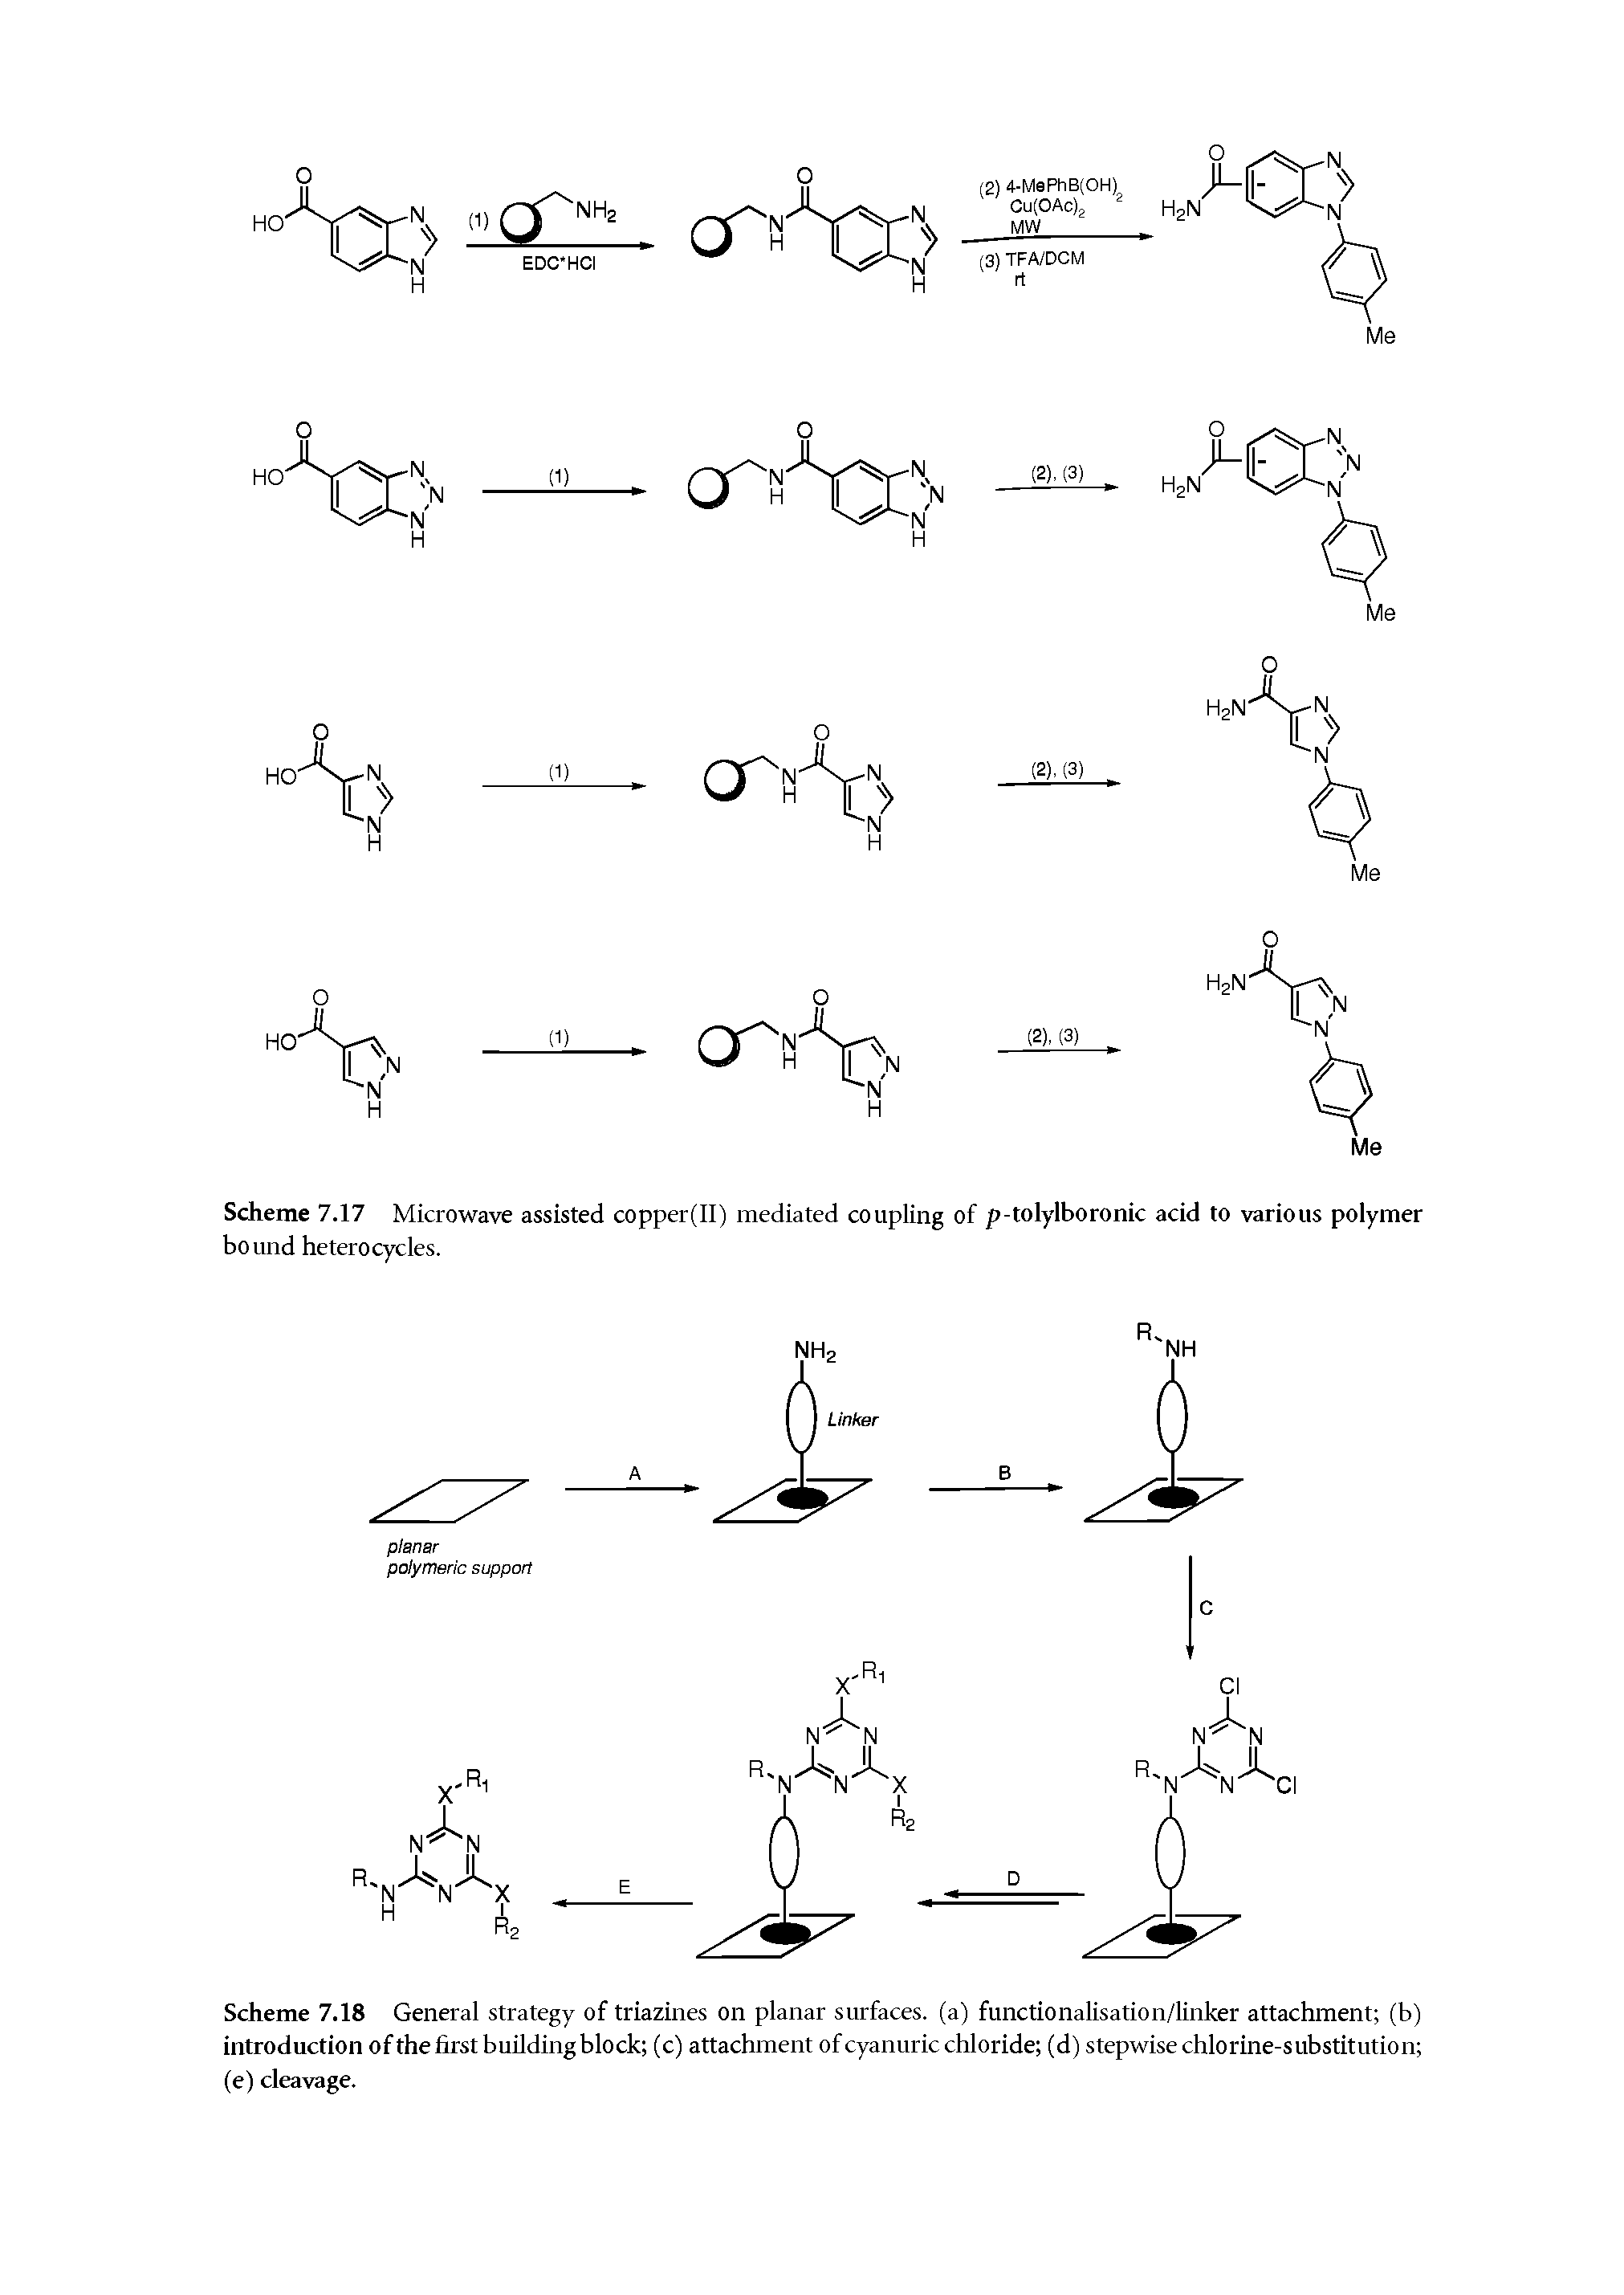 Scheme 7.18 General strategy of triazines on planar surfaces, (a) functionalisation/linker attachment (b) introduction ofthe first building block (c) attachment of cyanuric chloride (d) stepwise chlorine-substitution (e) cleavage.